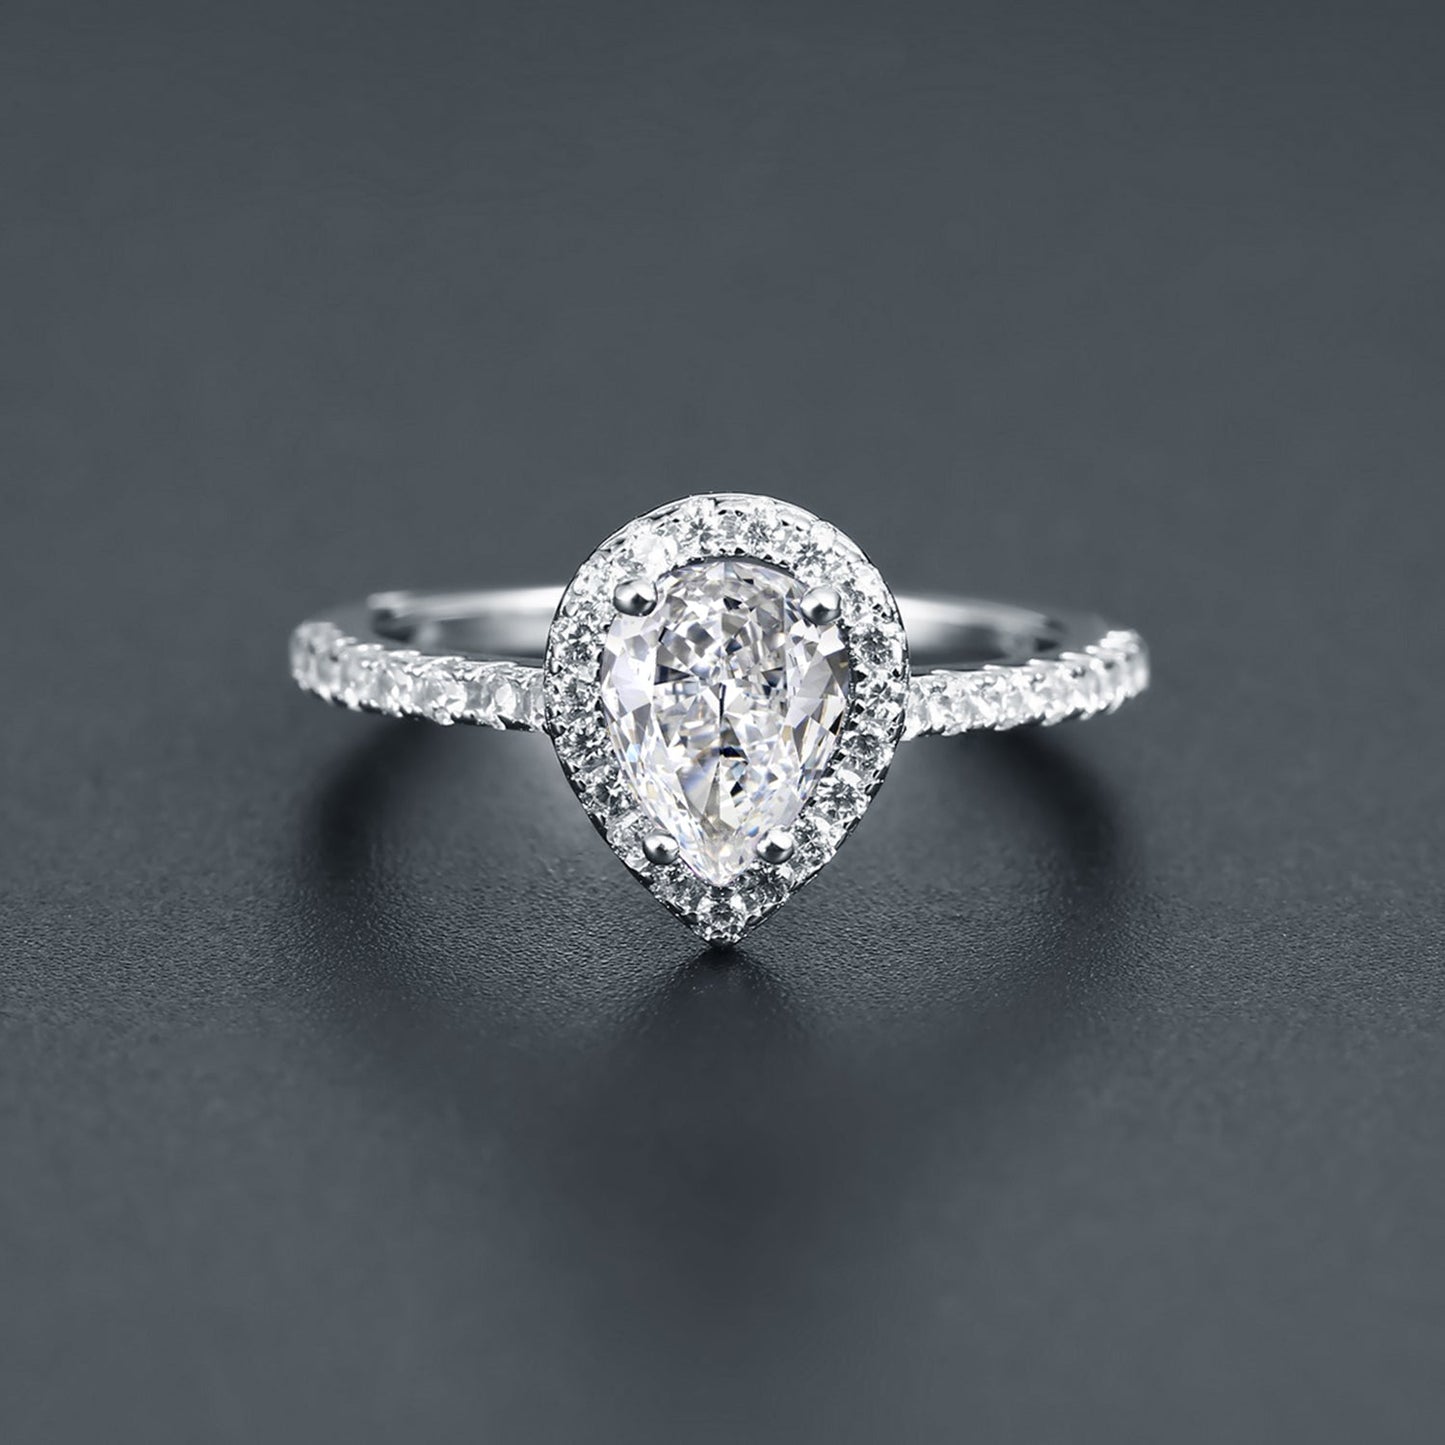 Pear Shape Halo 1.25ct Moissanite Engagement Ring Set in 9ct White Gold